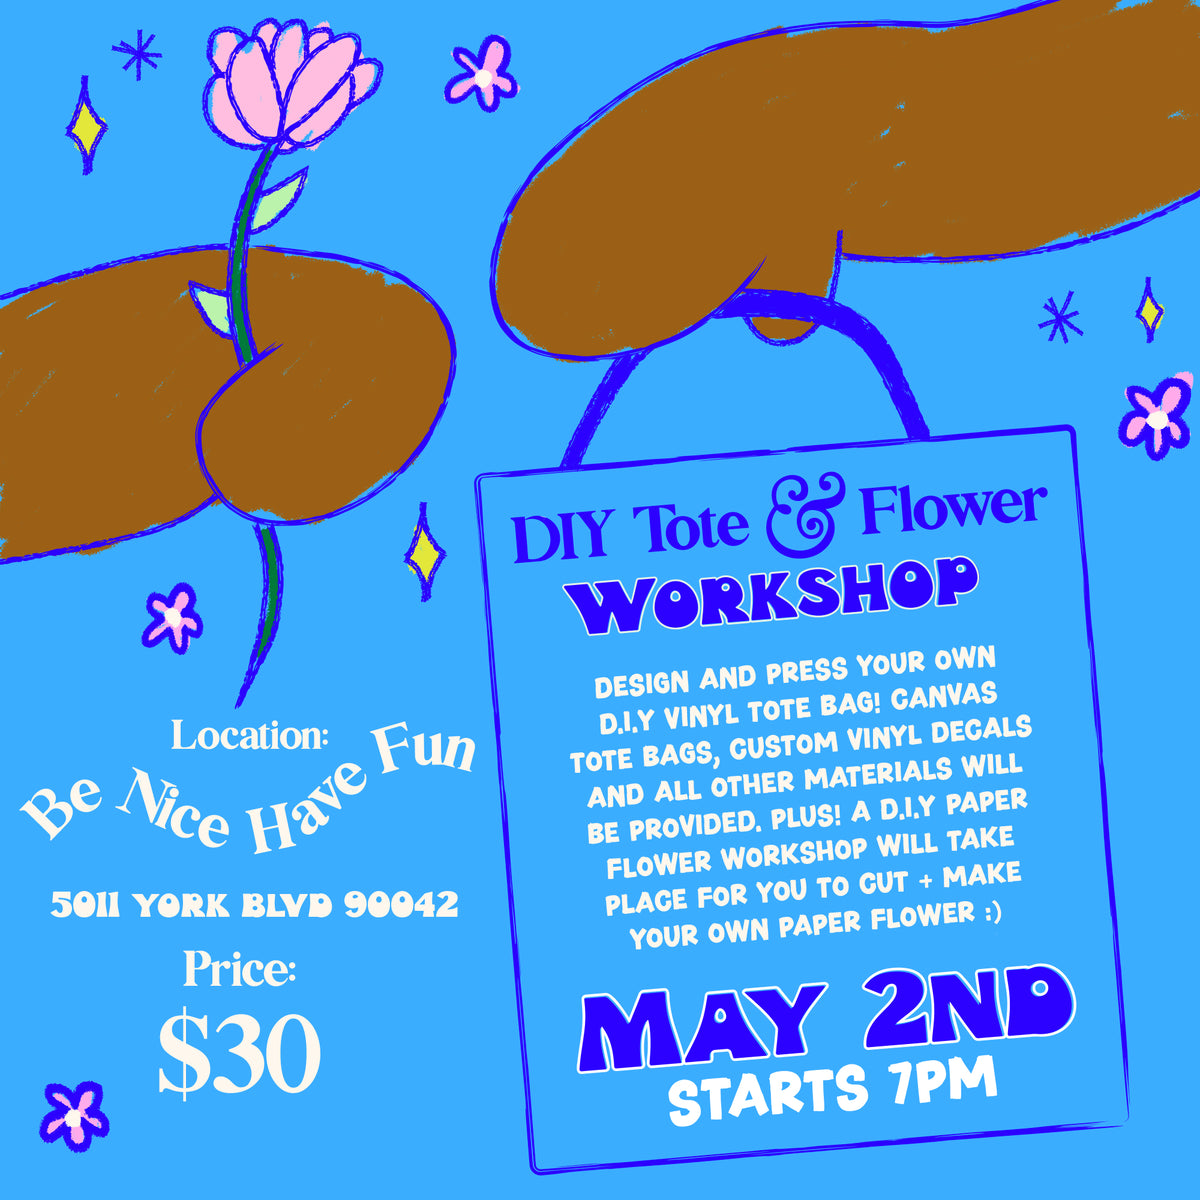 DIY Tote Bag and Flower Workshop | May 2nd, 7pm